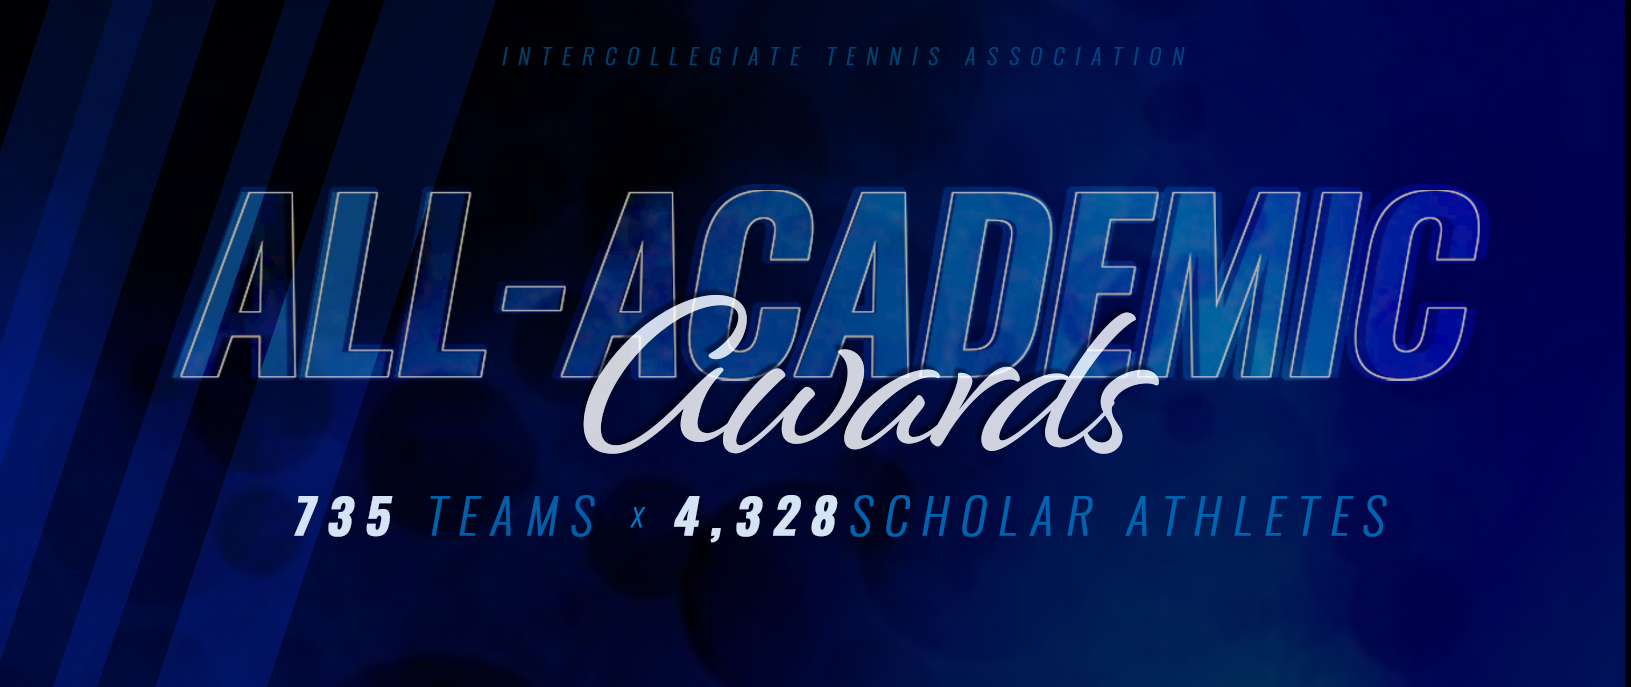 2017-18 ITA Awards Include 13 Austin College Tennis Players, Both Teams